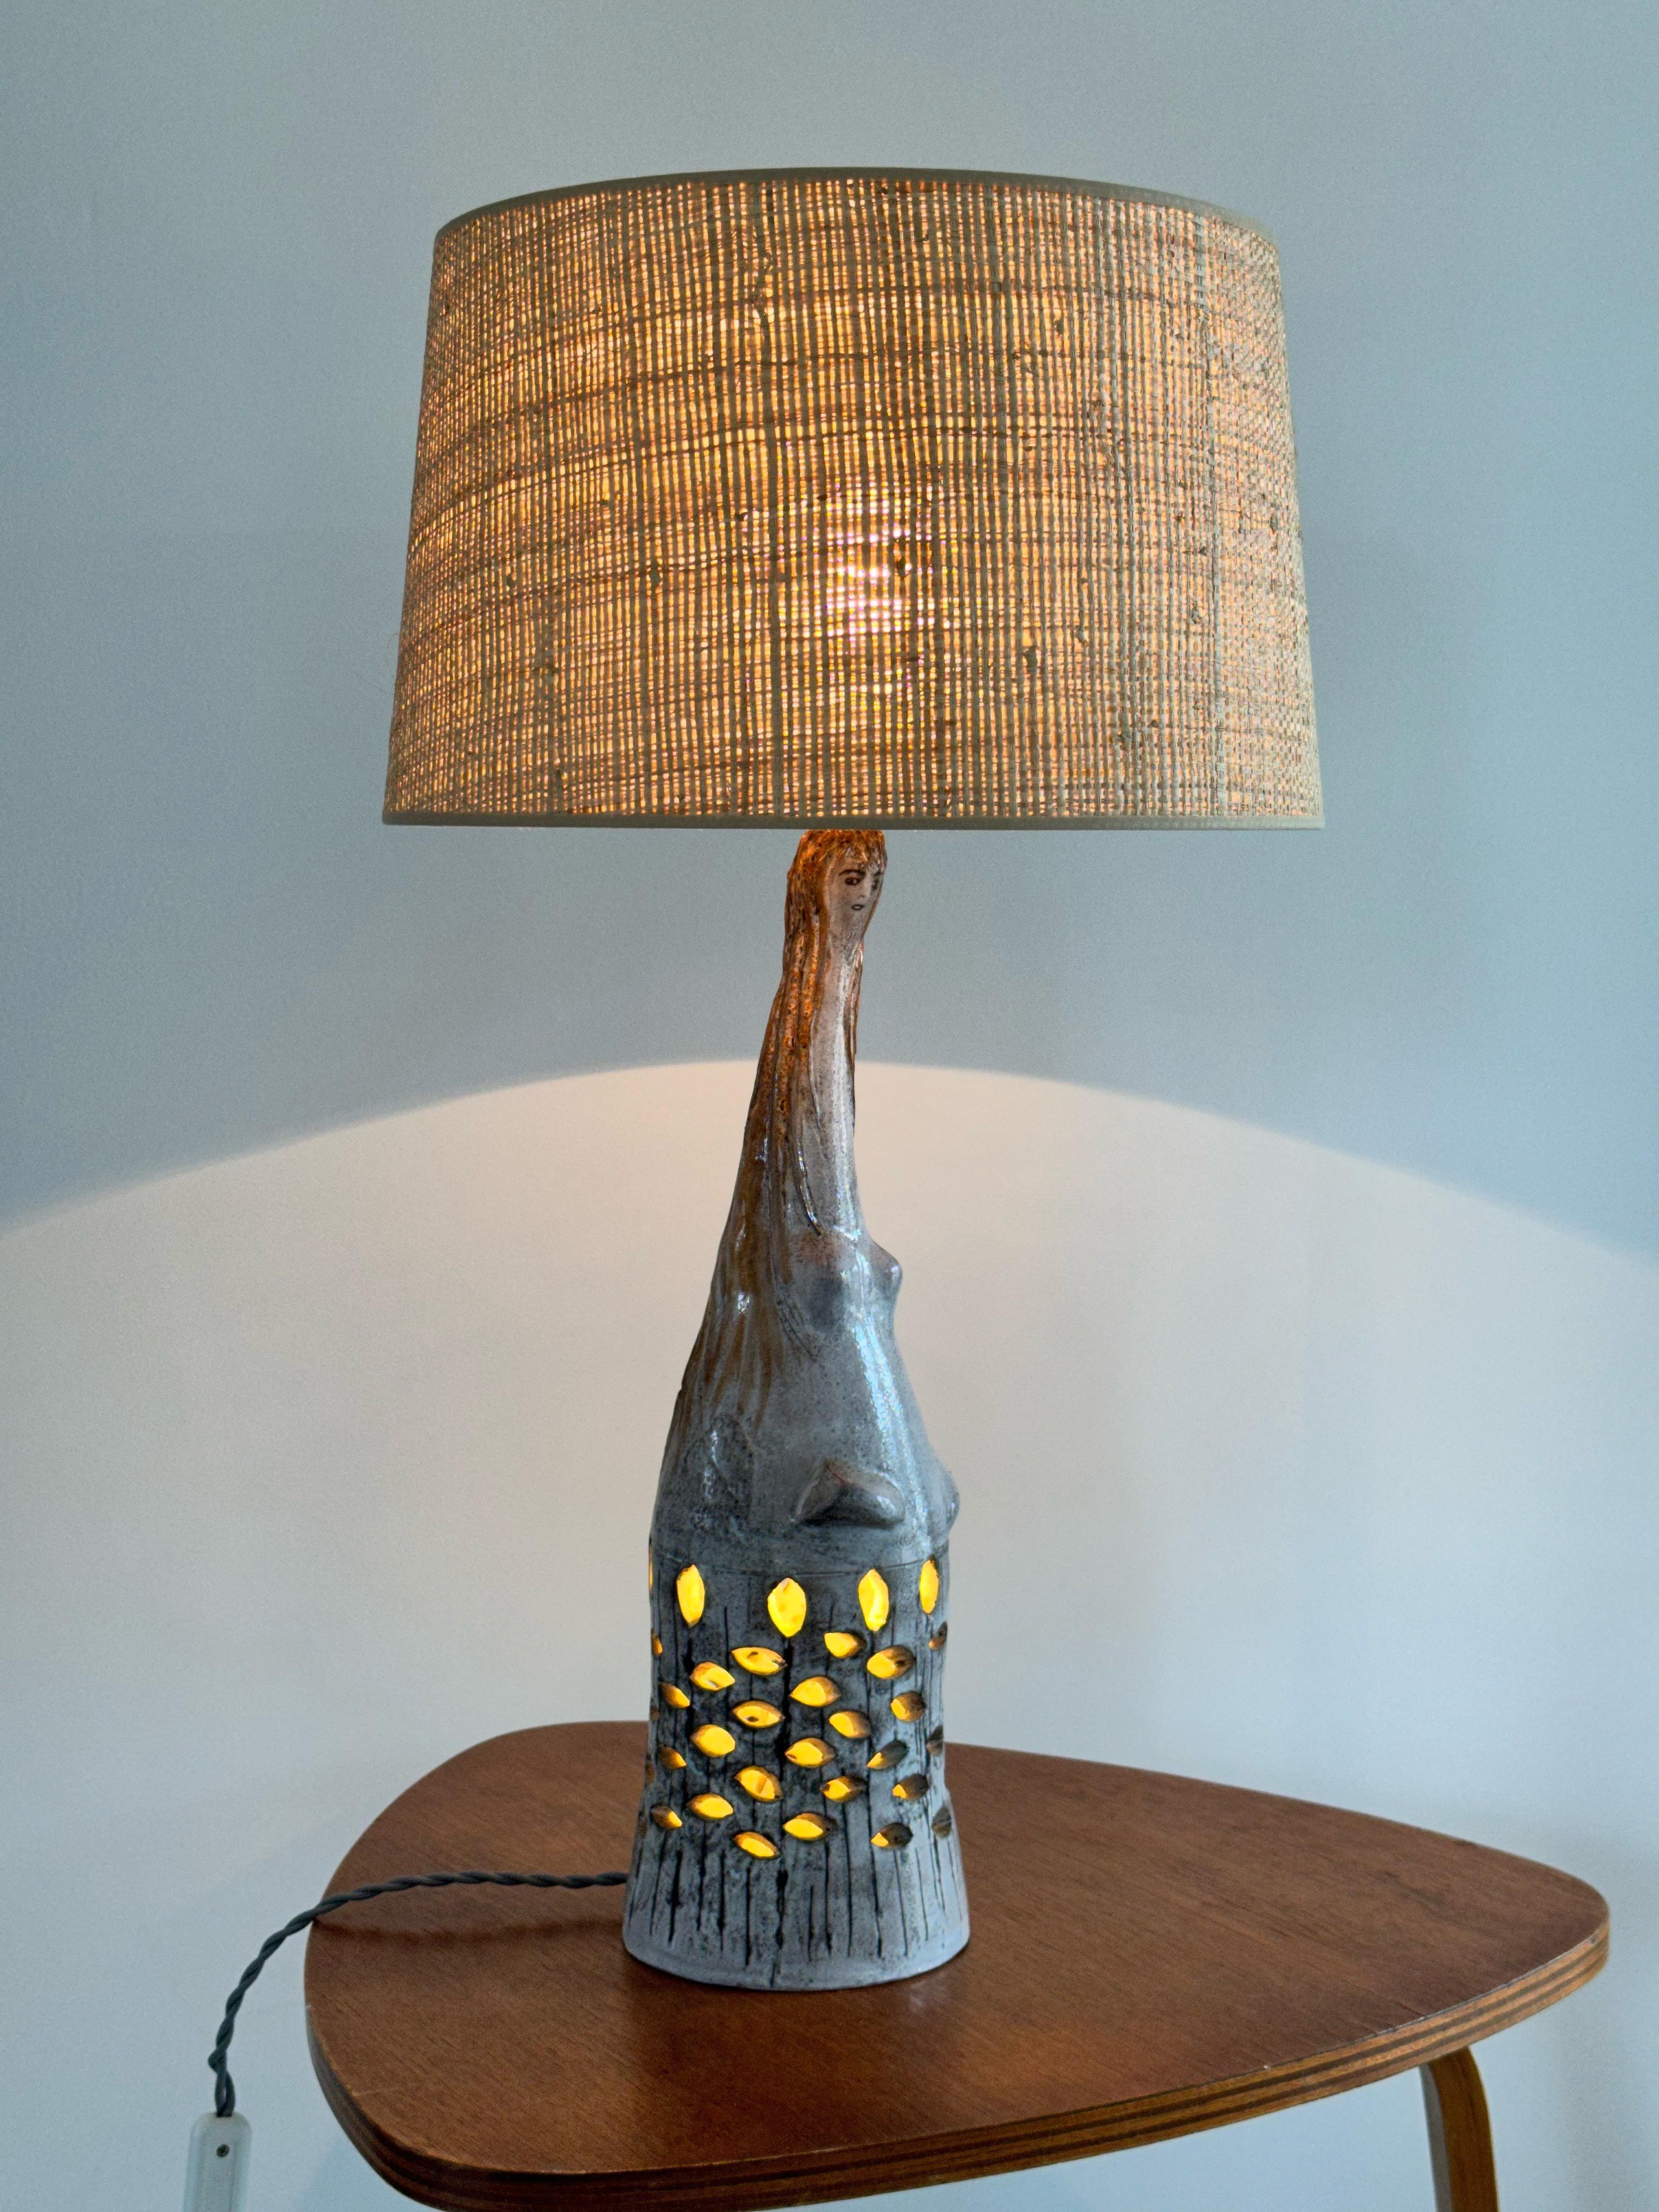 Anthropomorphic Ceramic Lamp Maurice Camos, French Artist, Unique Work, 1960s For Sale 2